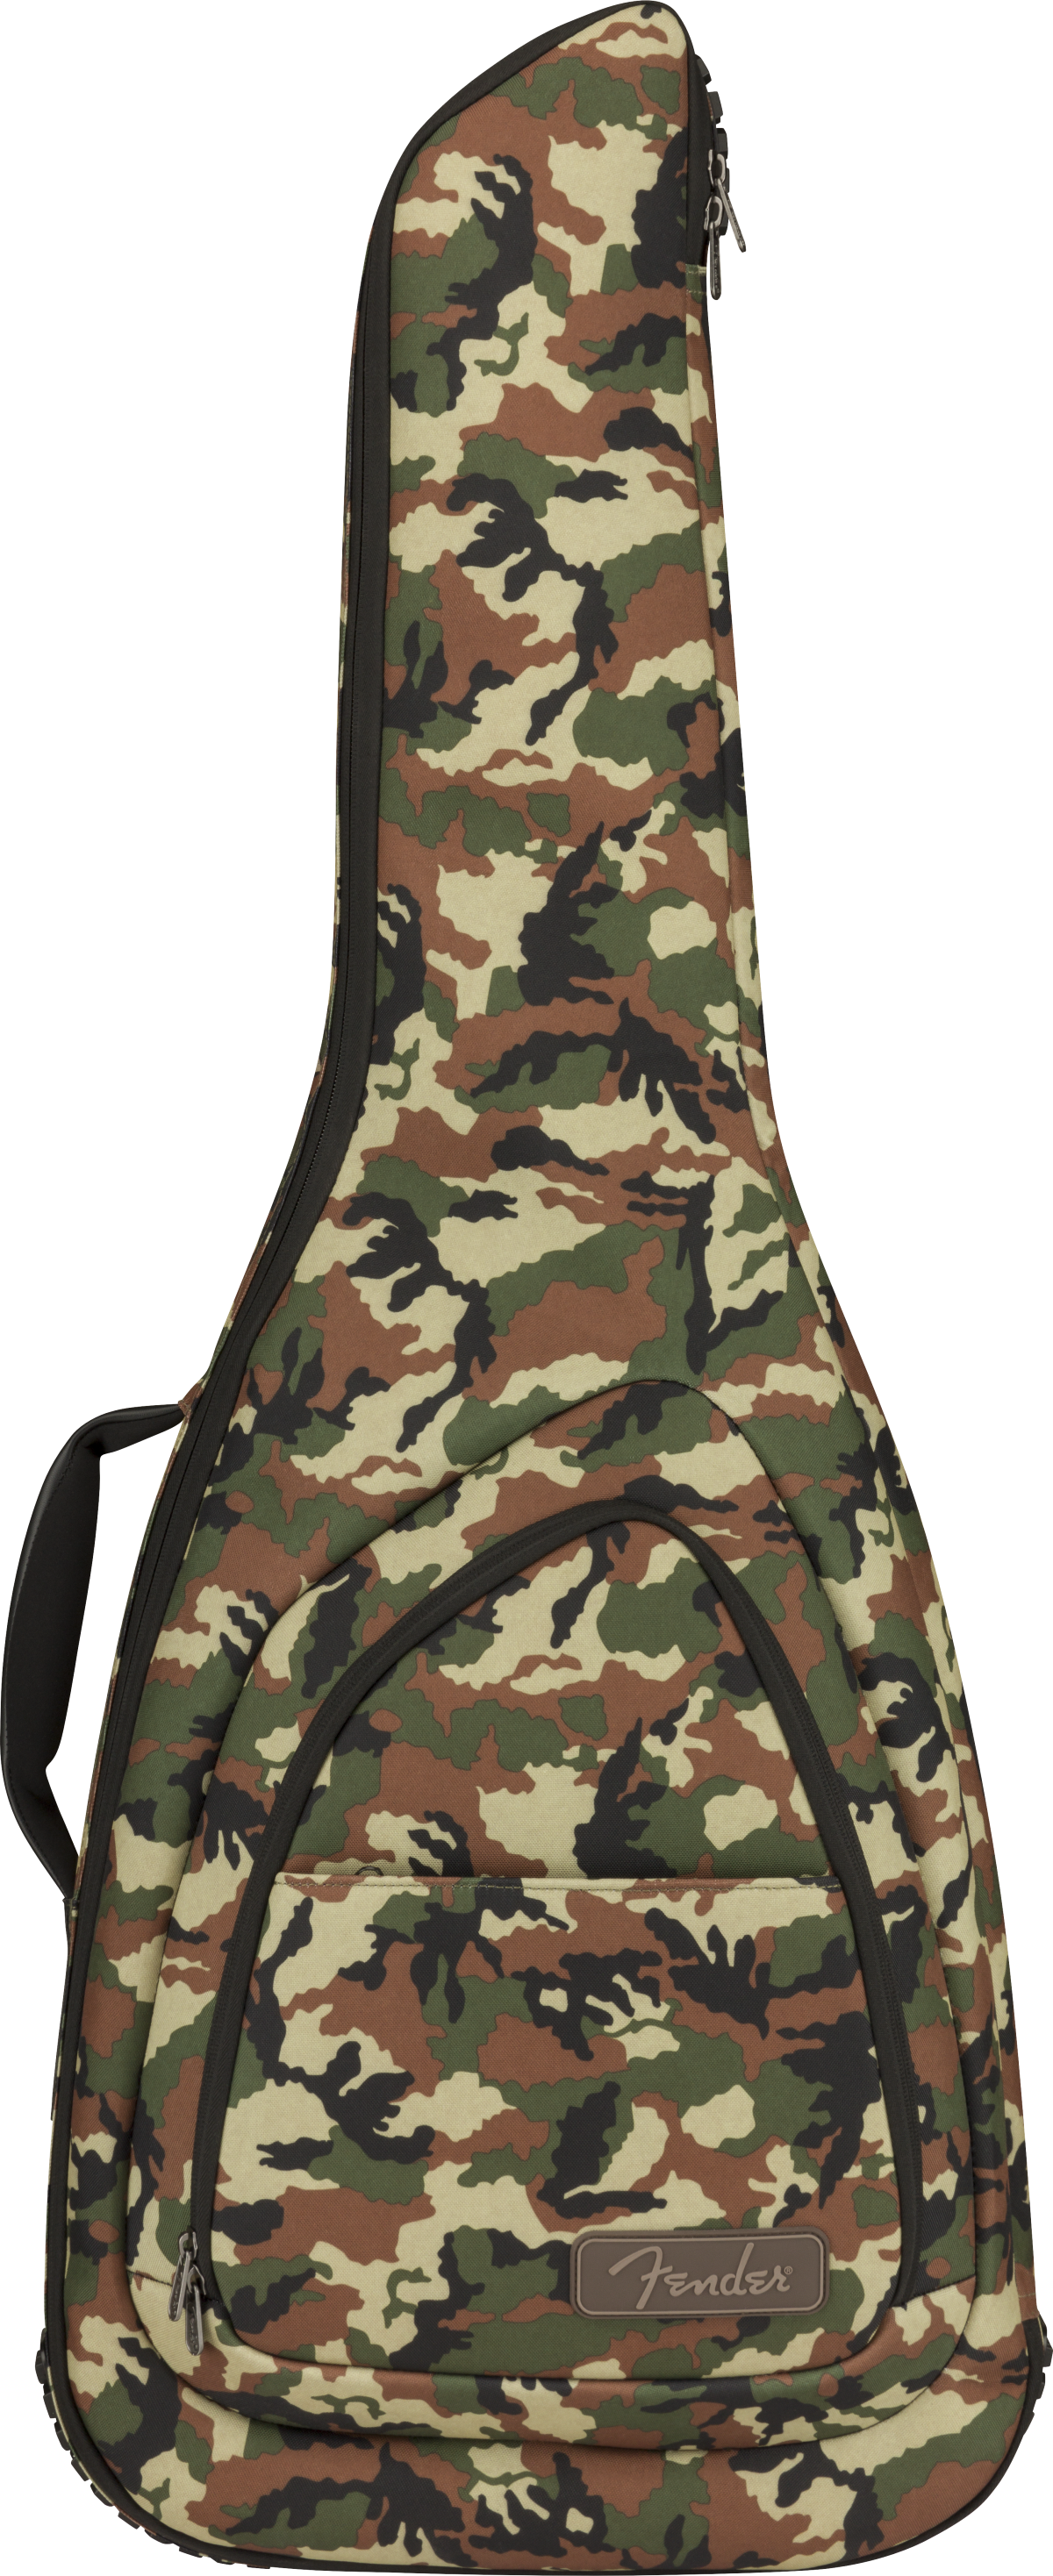 Fender FE920 Camo Electric Guitar Gig Bag - Choose from Woodland or Winter Camouflage